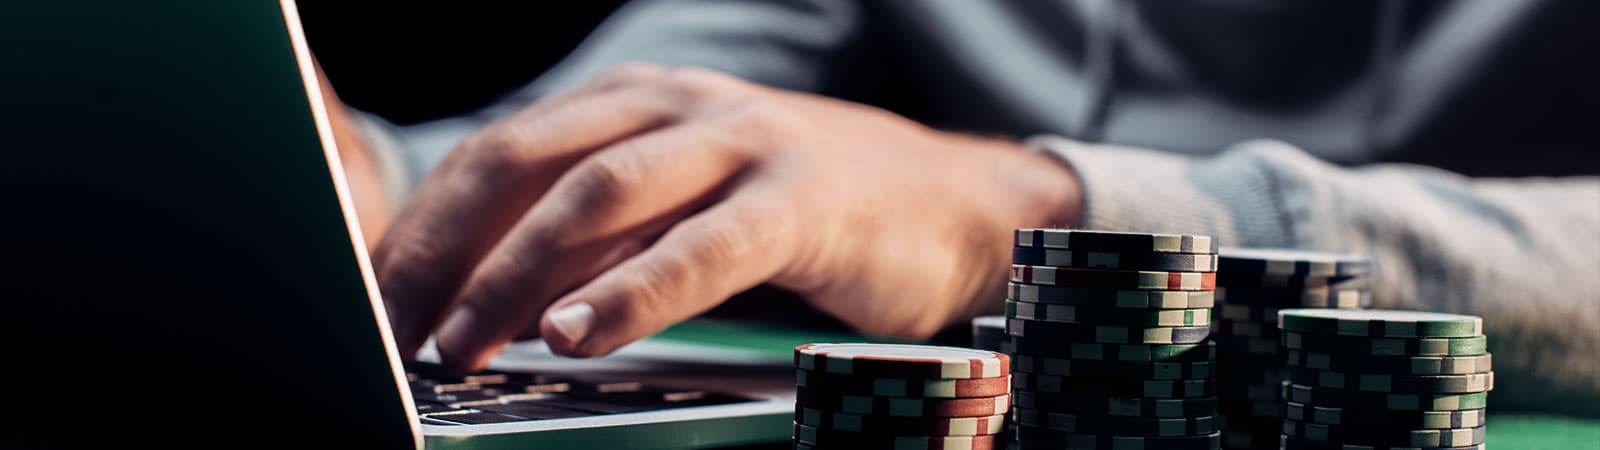 Person using a laptop for online gambling with stacks of poker chips beside them